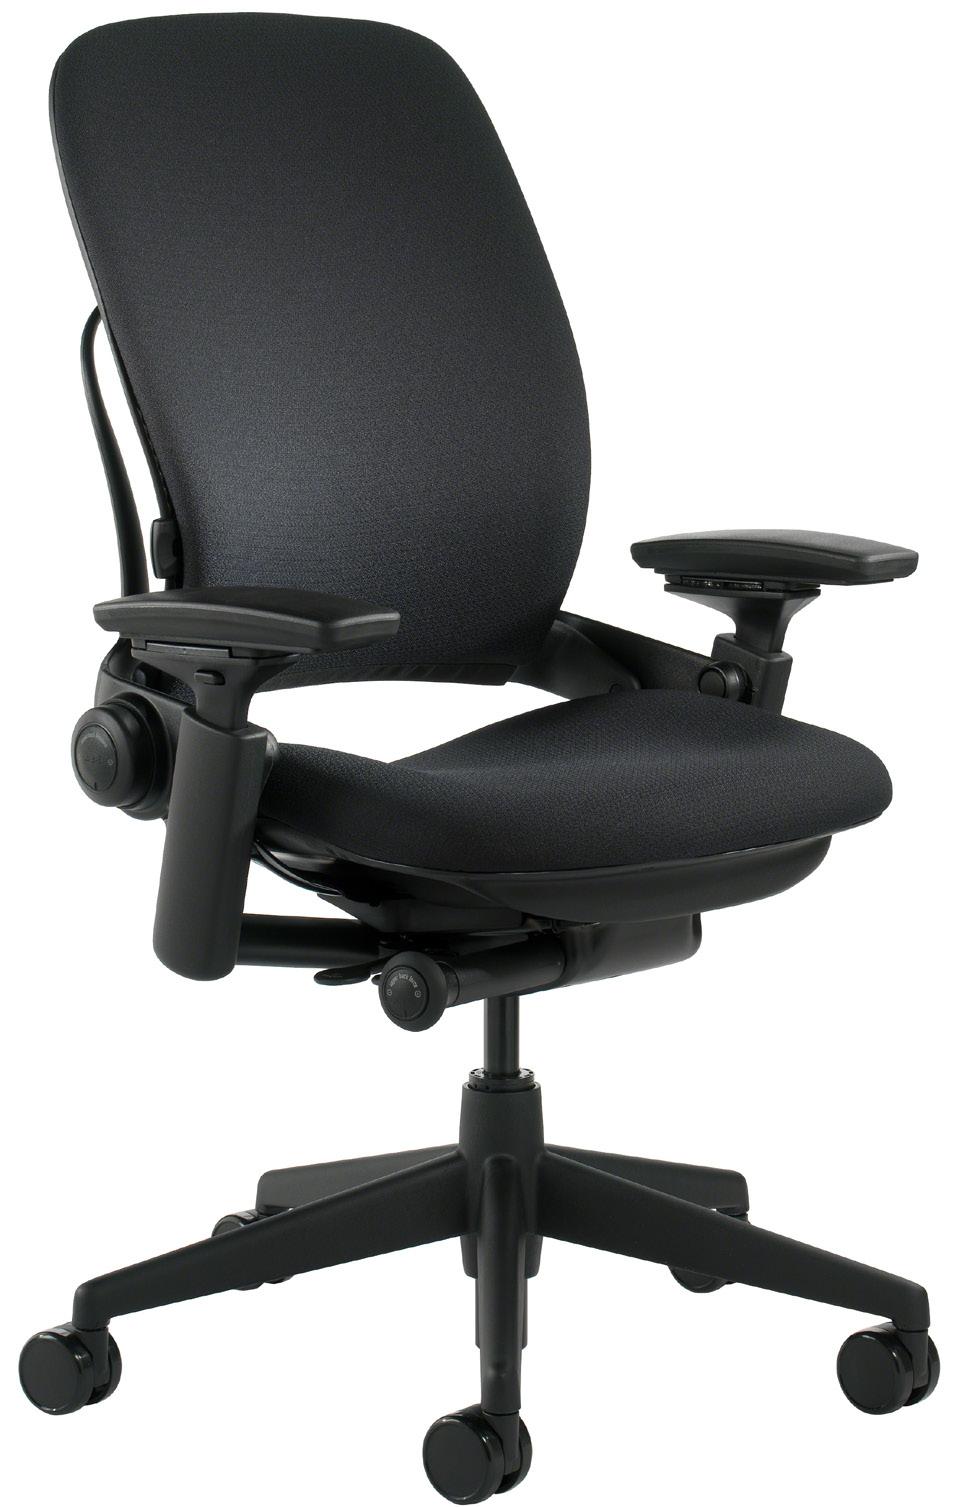 Steelcase Leap The award-winning Steelcase Leap, one of the most popular ergonomic chairs on the market, provides superior comfort, intuitive adjustment, and timeless style.